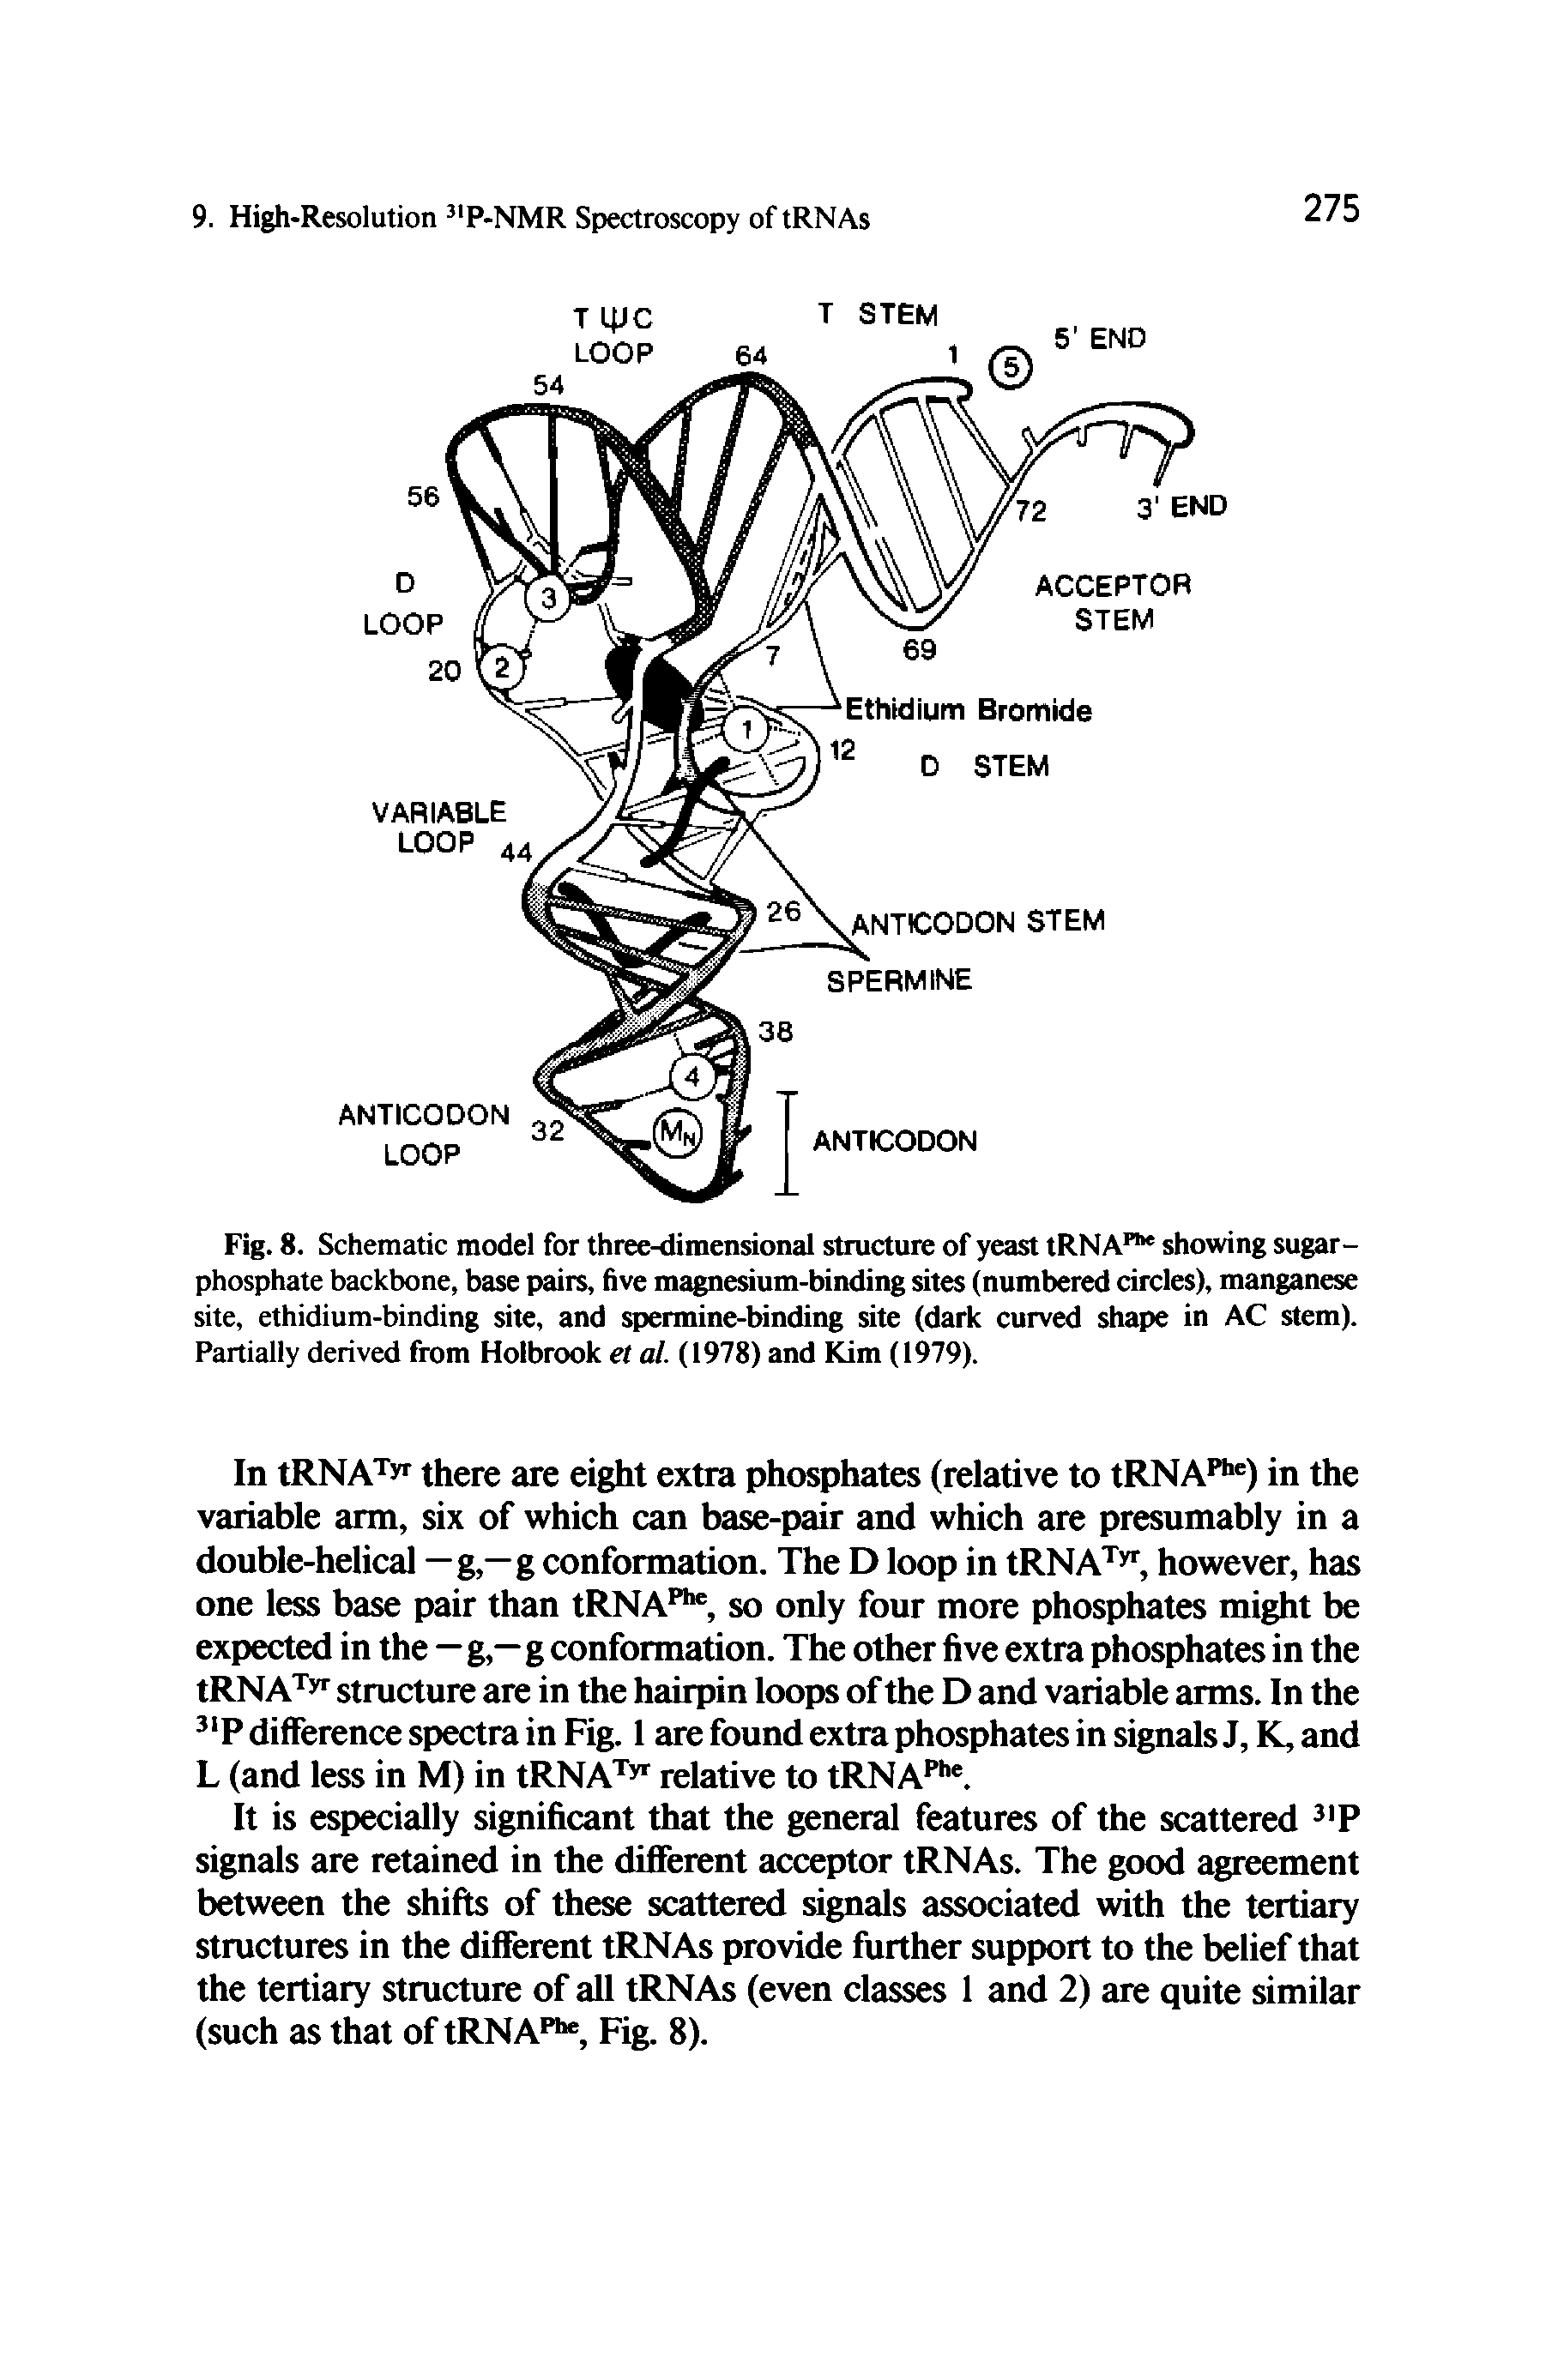 Fig. 8. Schematic model for three-dimensional structure of yeast tRNA" showing sugar-phosphate backbone, base pairs, five magnesium-binding sites (numbered circles), manganese site, ethidium-binding site, and spermine-binding site (dark curved shape in AC stem). Partially derived from Holbrook et al. (1978) and Kim (1979).